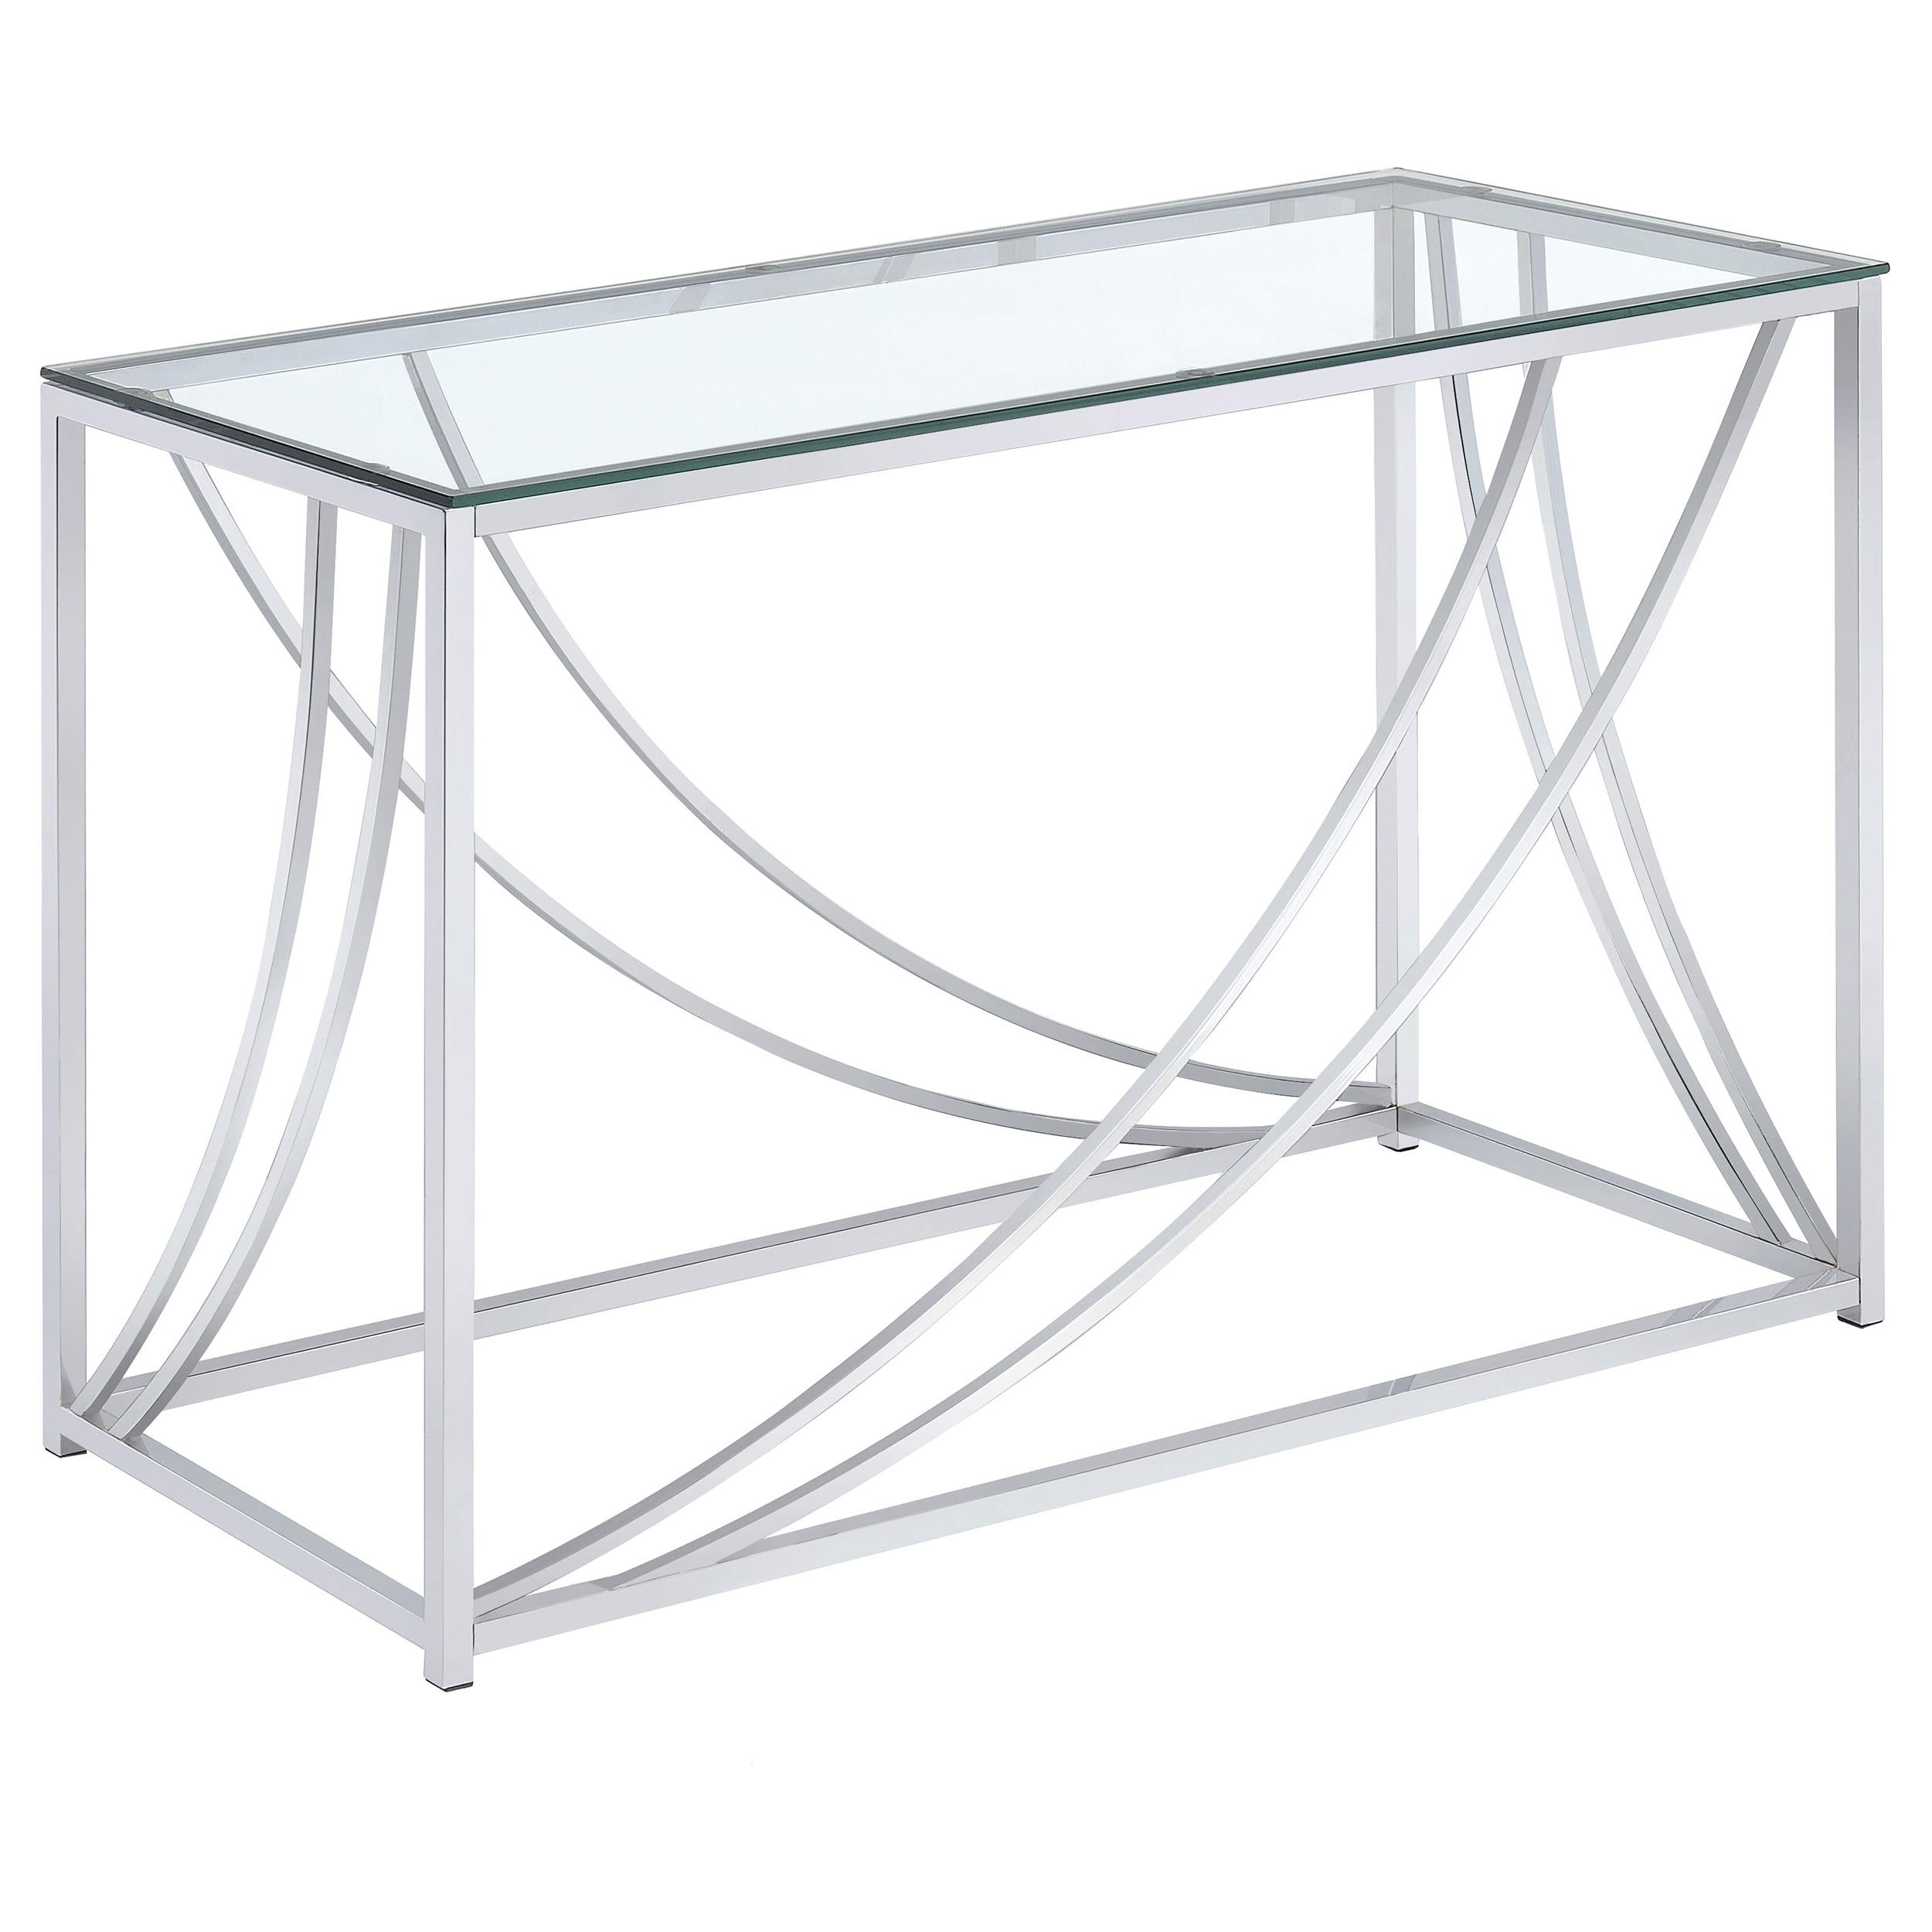 Lille Glass Top Rectangular Sofa Table Accents Chrome image